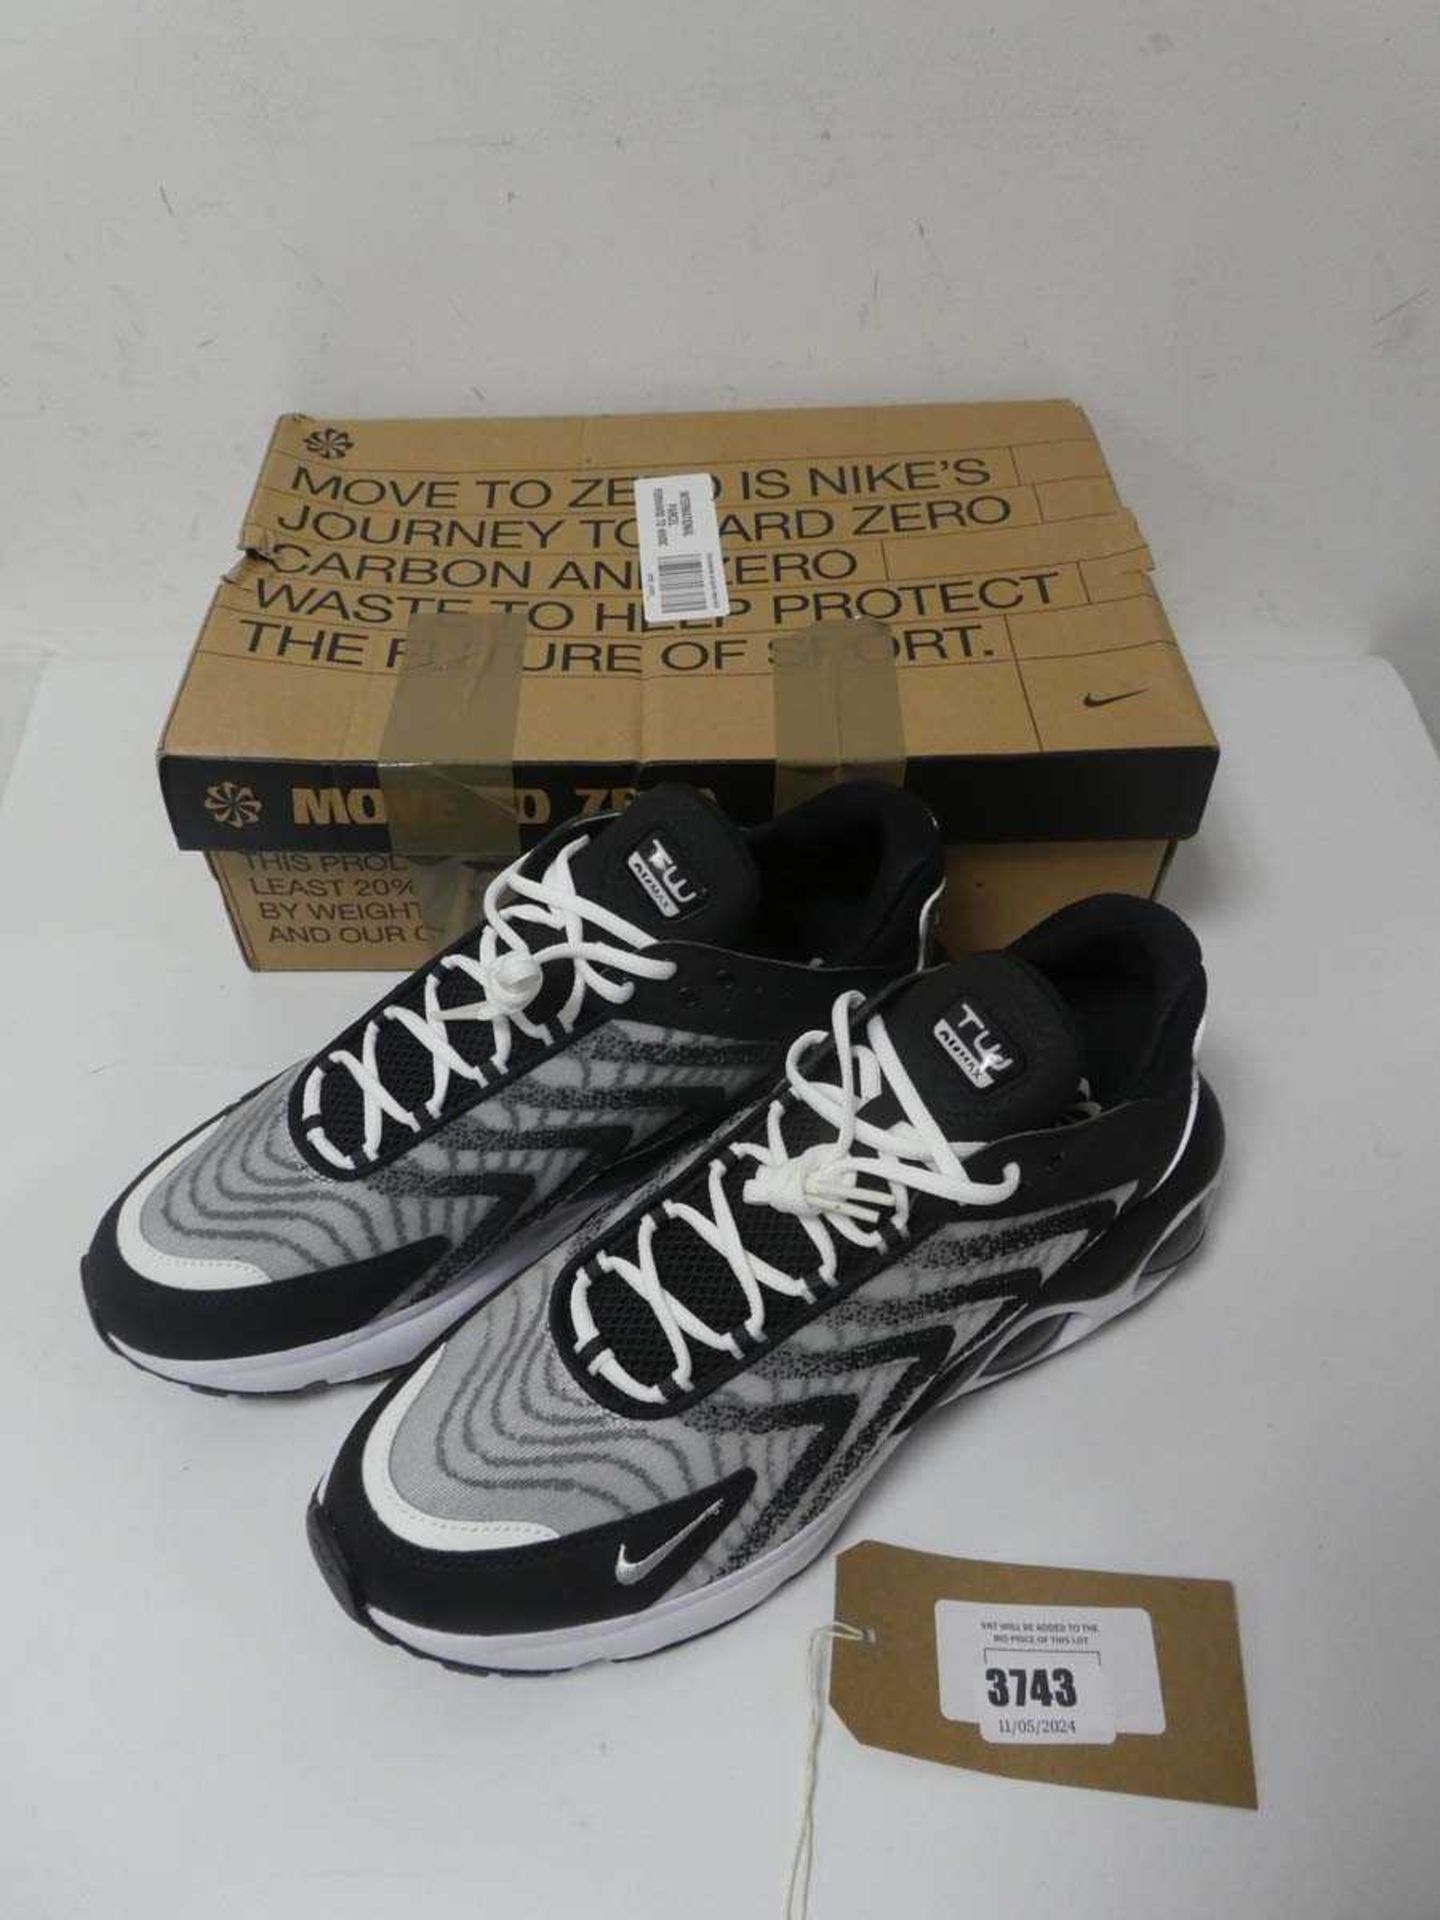 +VAT Boxed pair of Nike Air Max trainers, white and black, UK 11